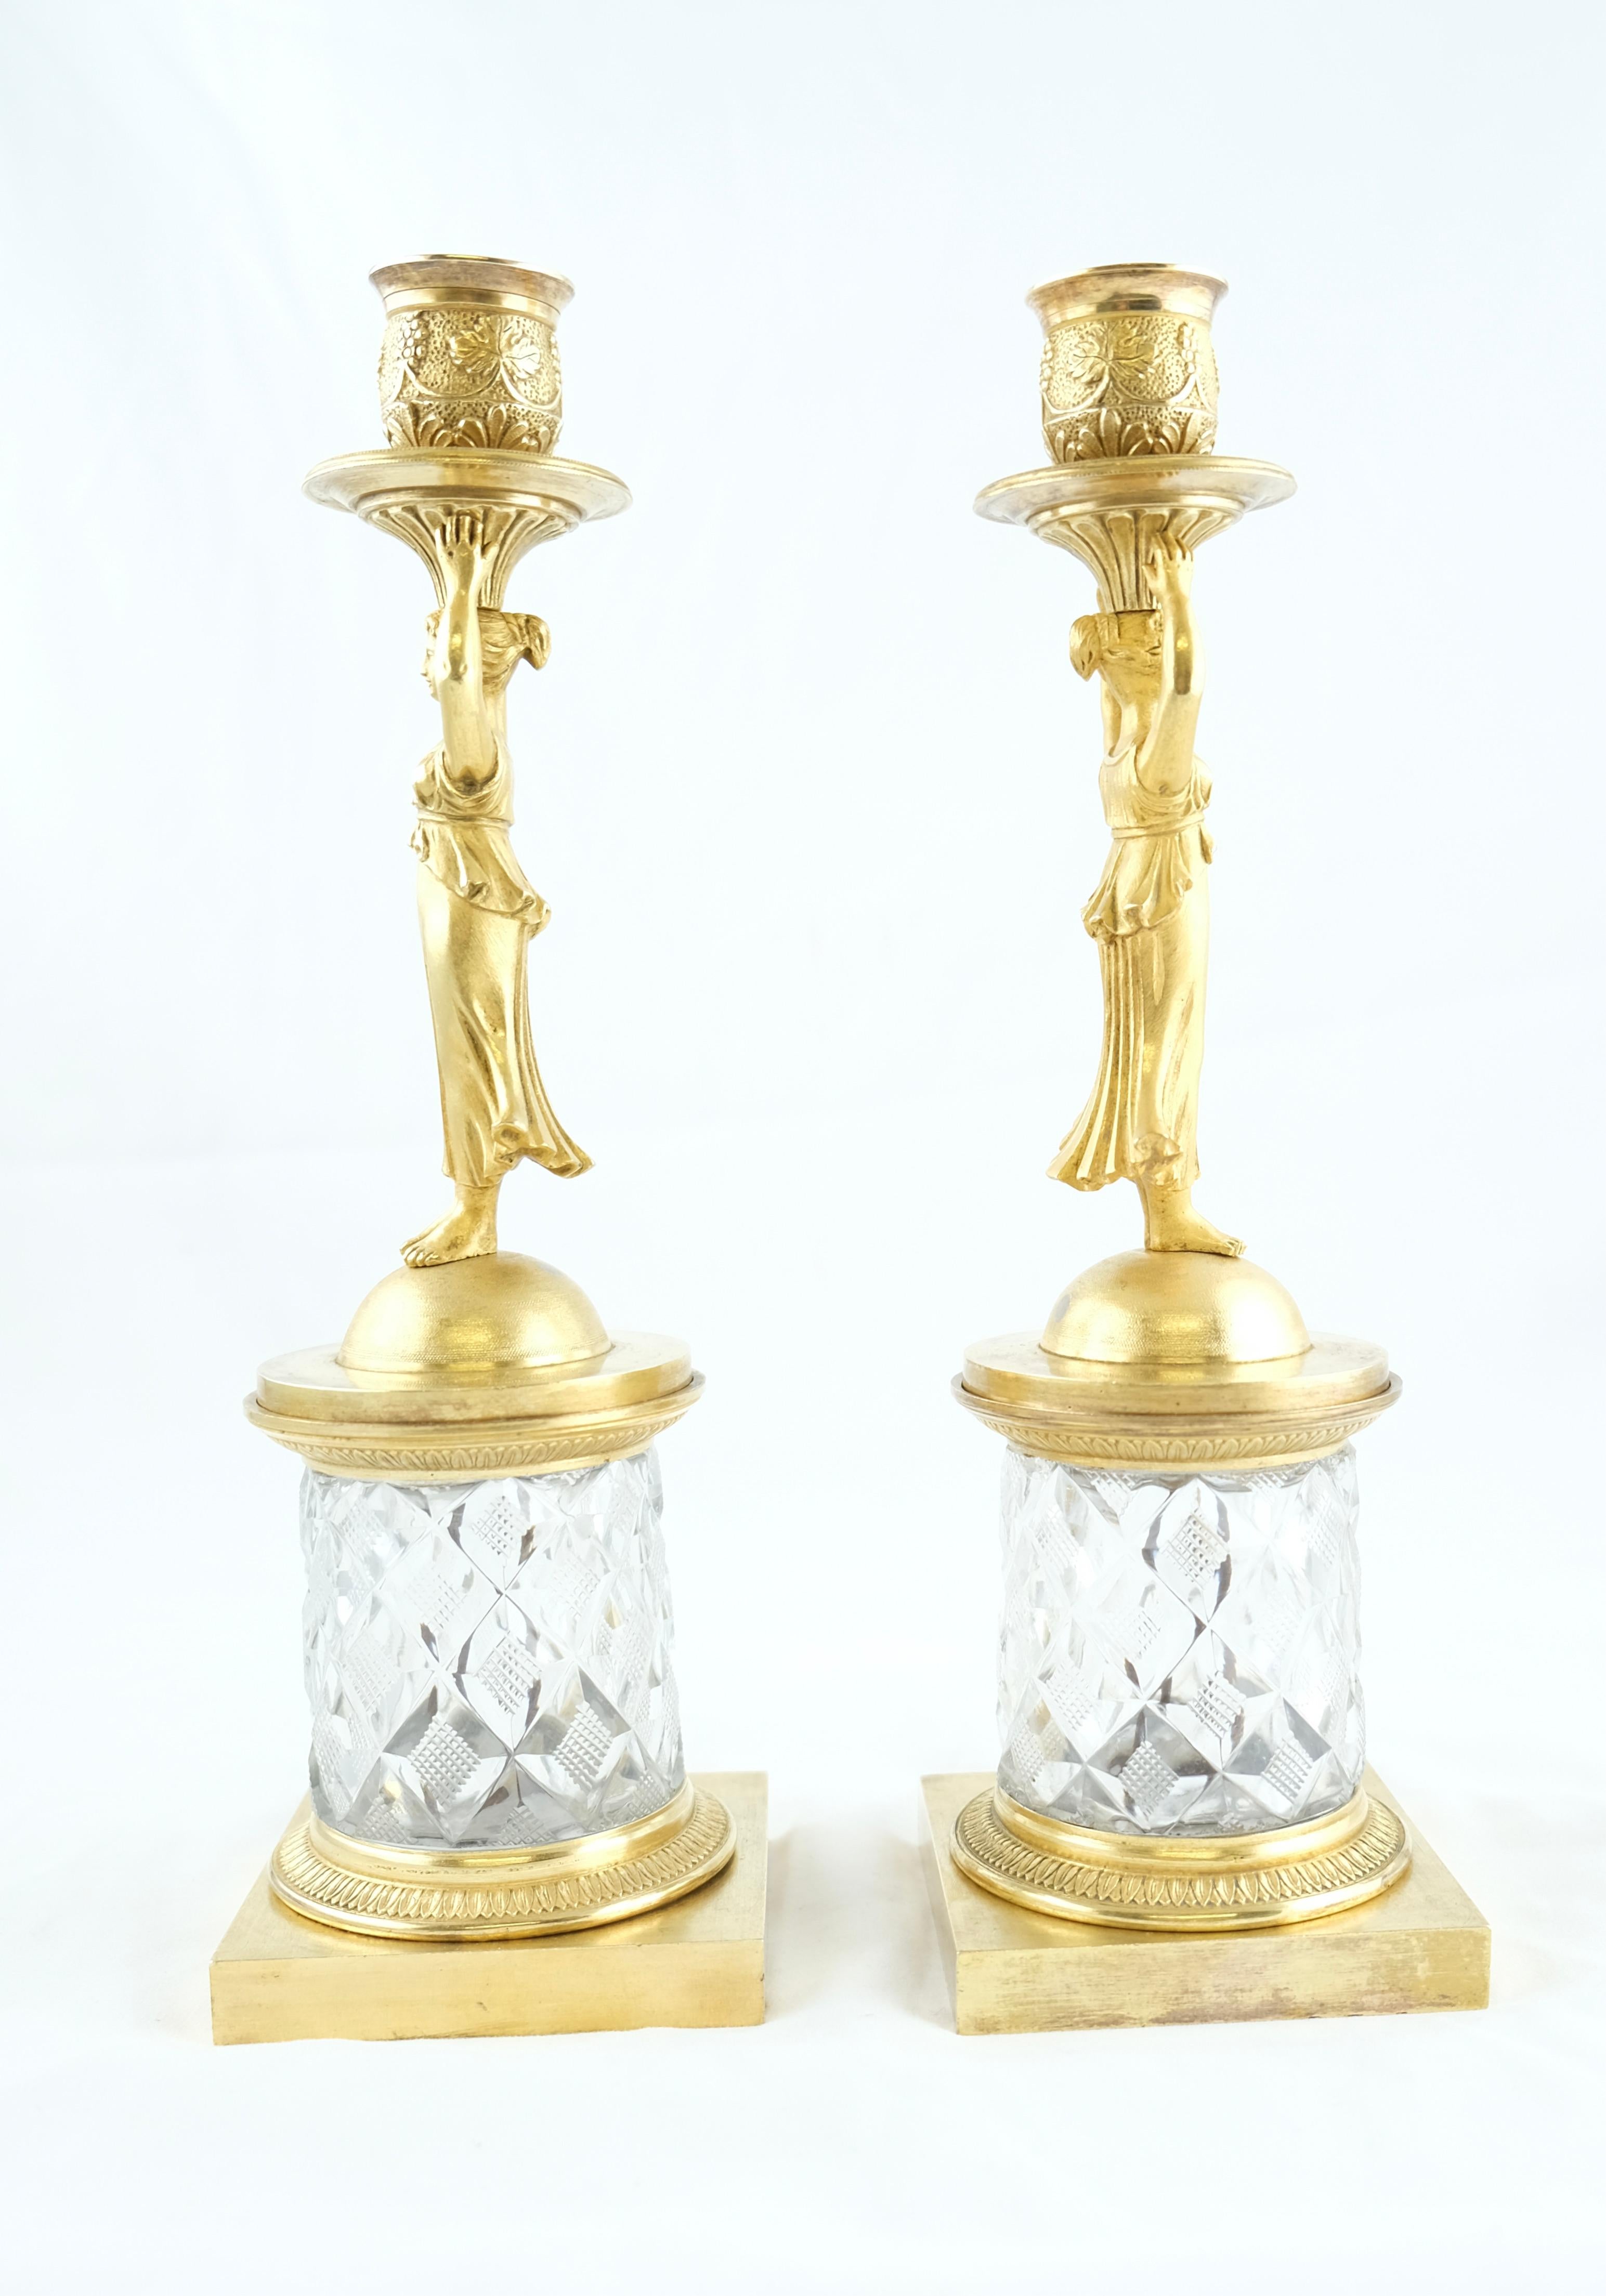 Pair of Empire Gilt Bronze and Cut Crystal Candlesticks, Ca 1810 For Sale 1